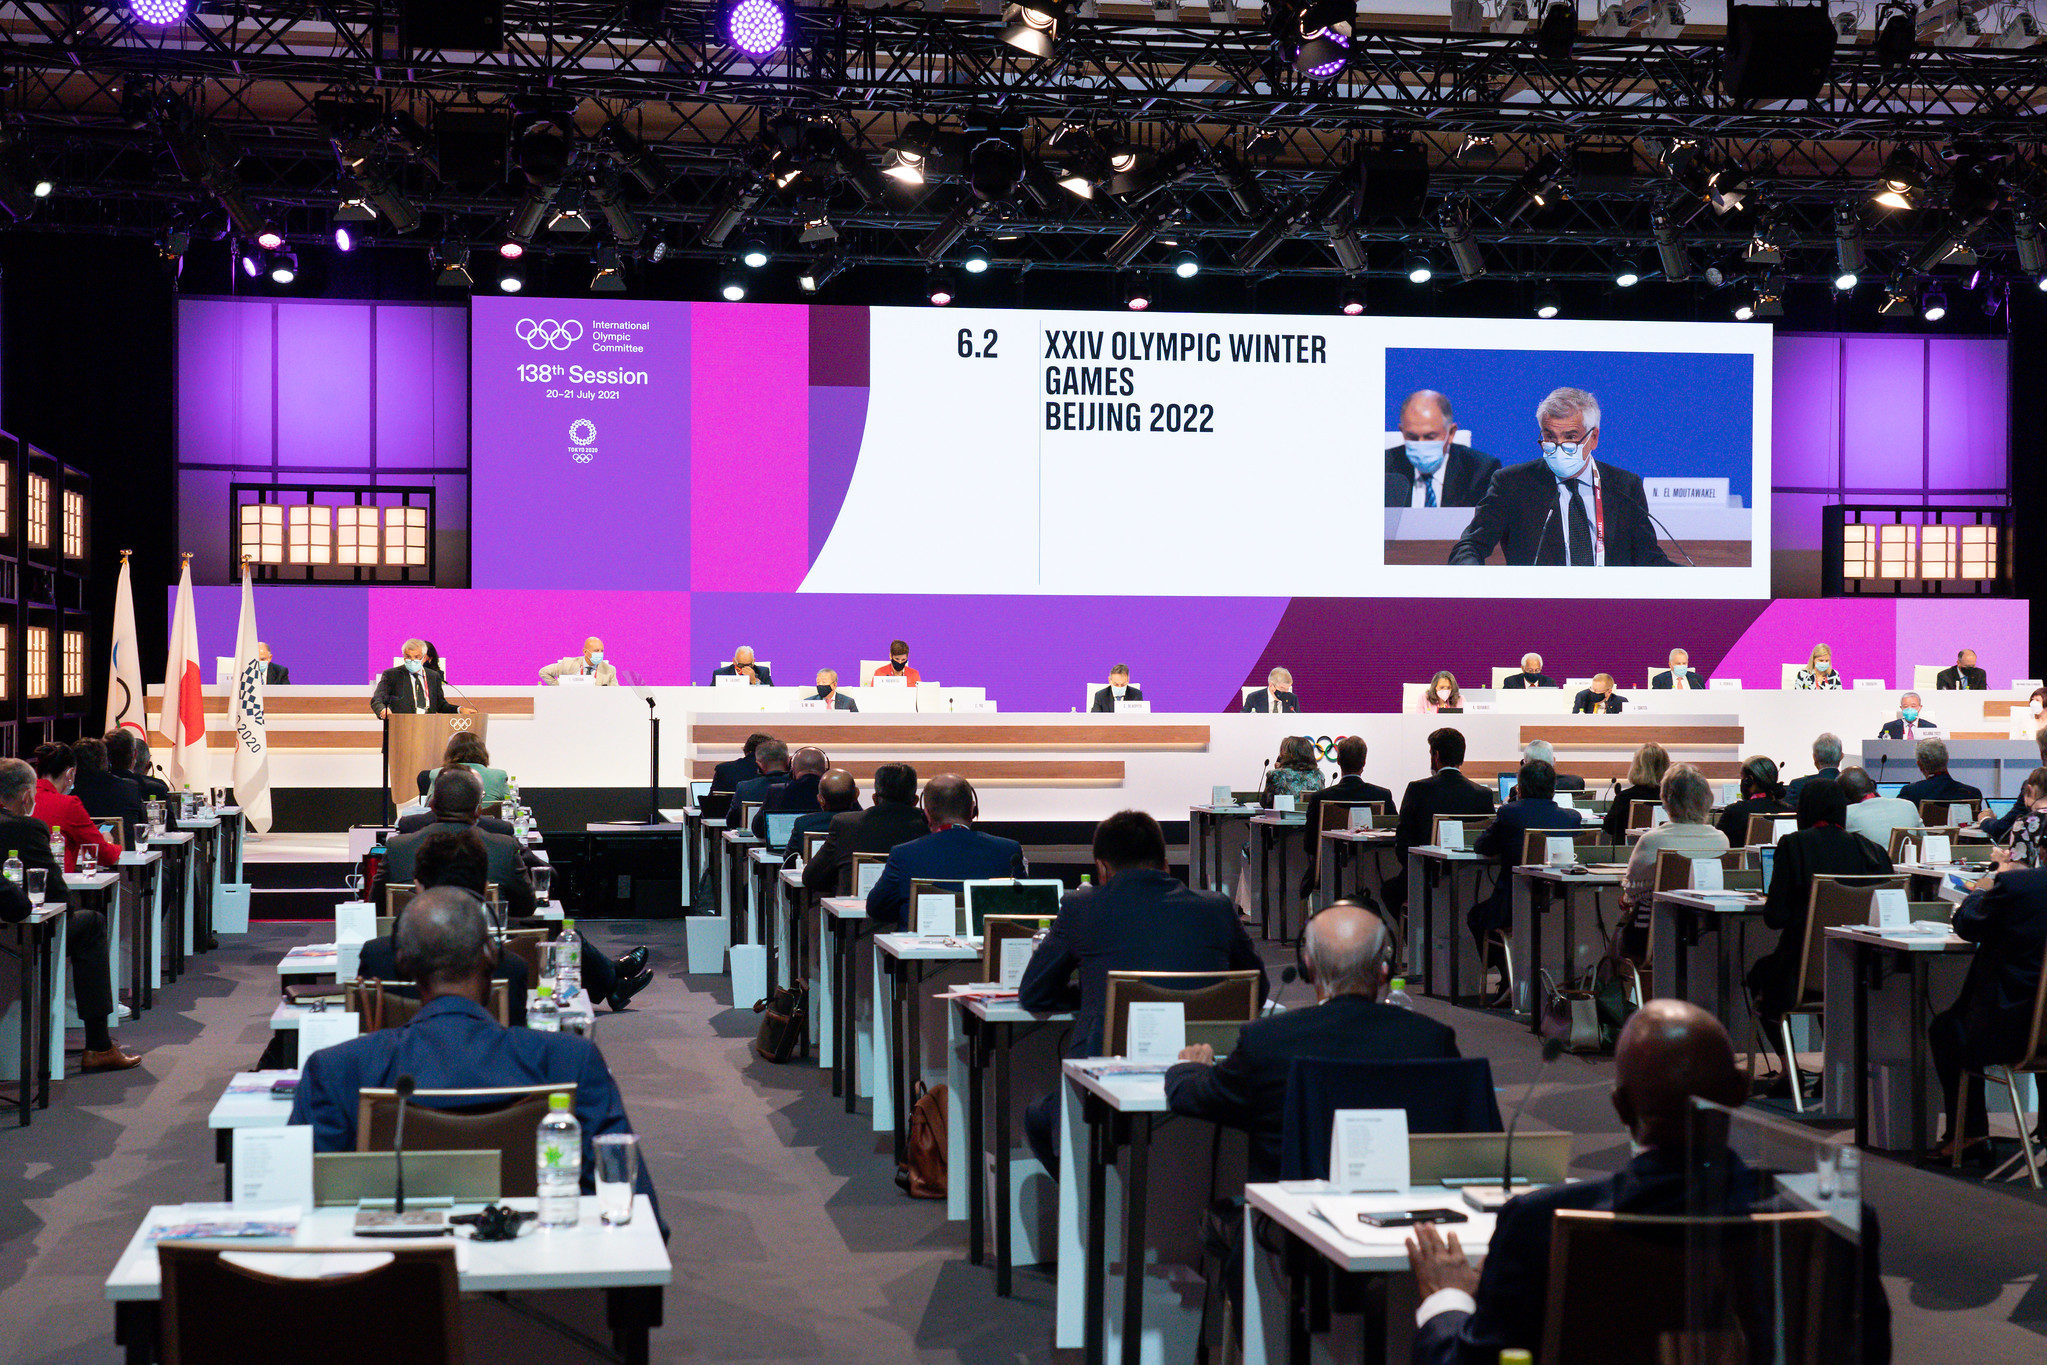 COVID-19 issues force IOC to shorten Session in Beijing